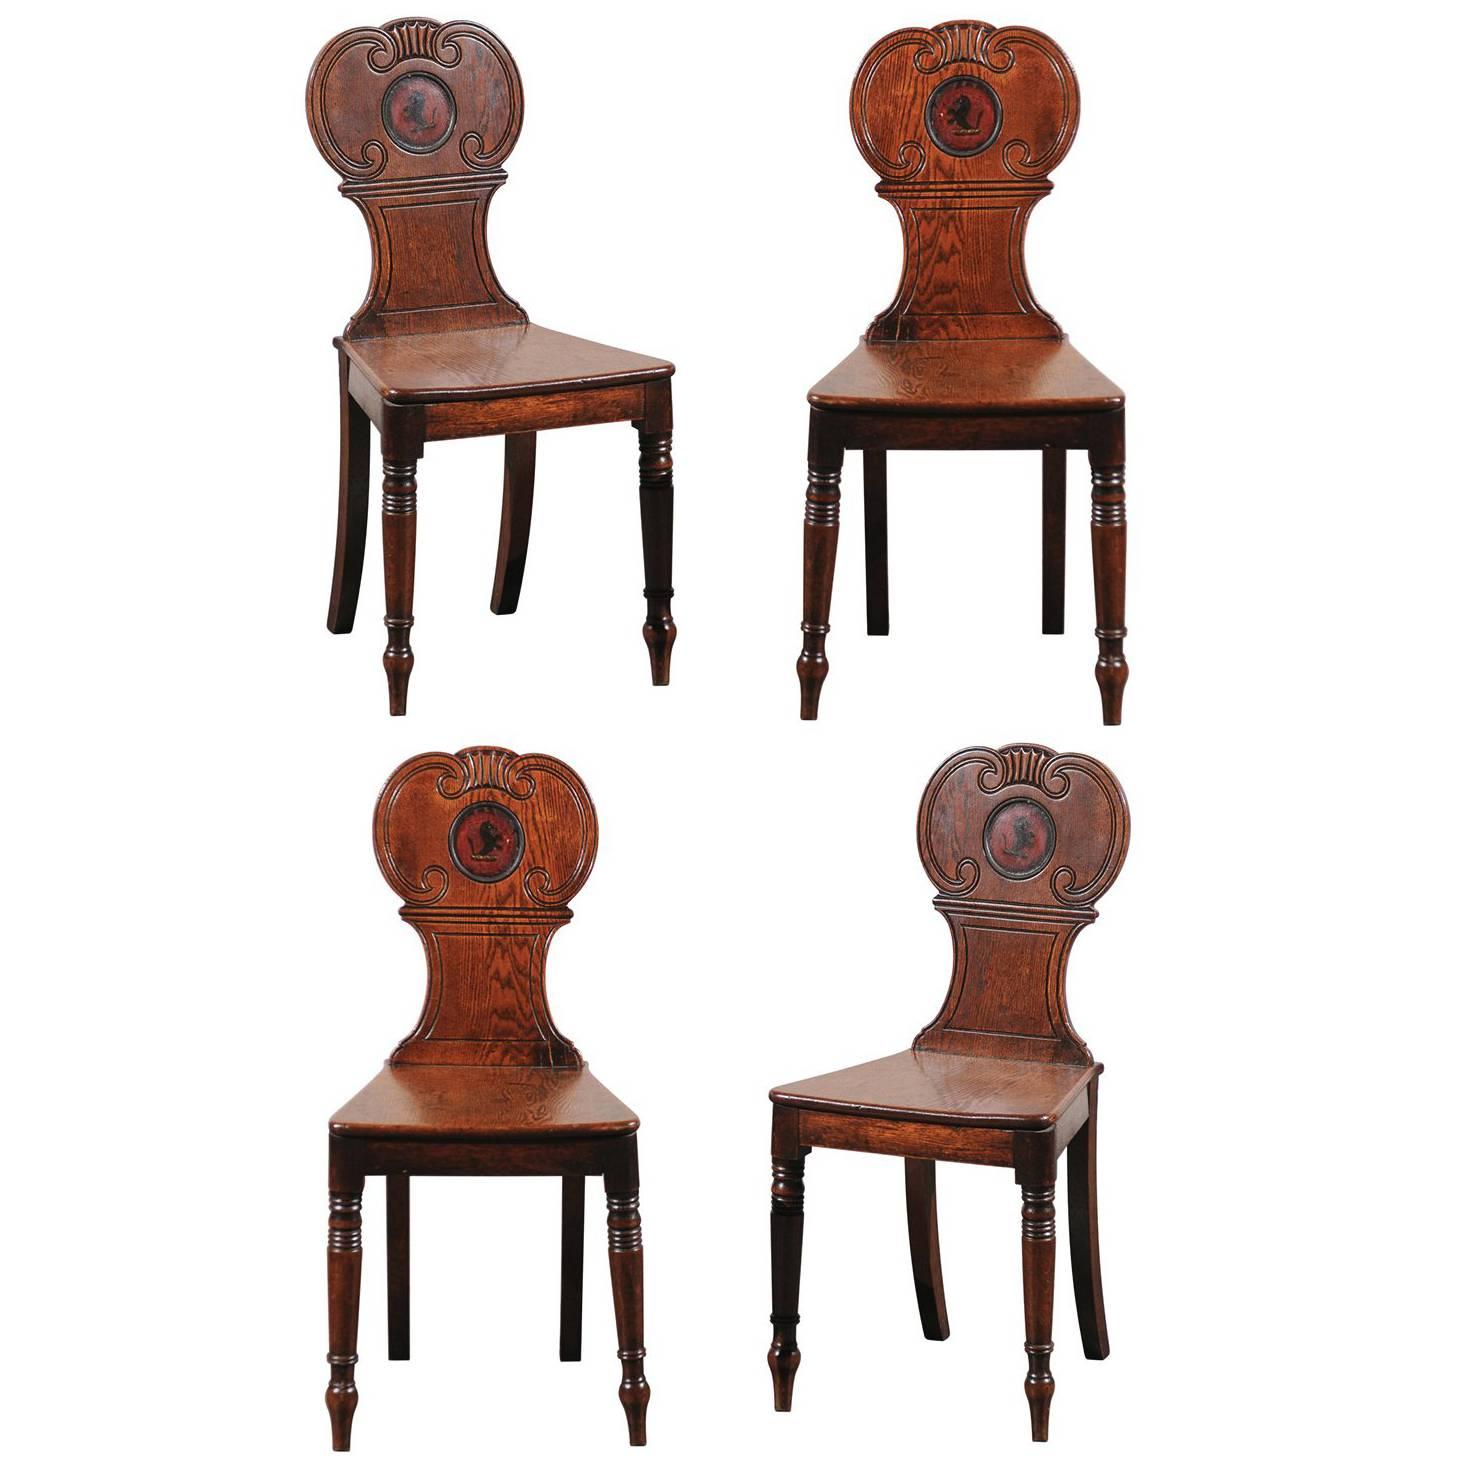 English Set of Four Hall Chairs, Oak with Crest, circa 1830